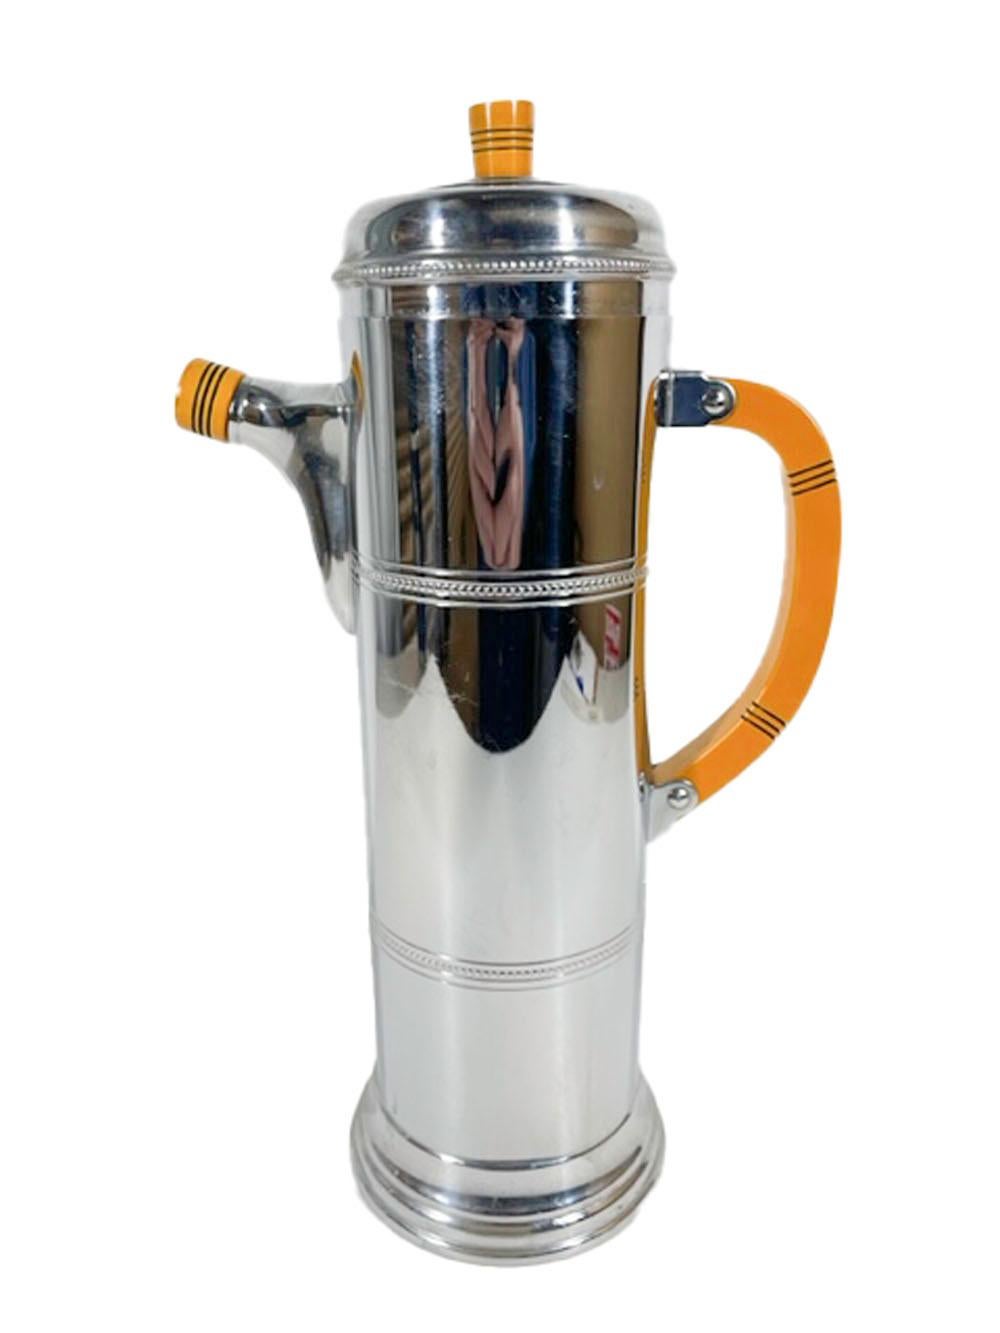 20th Century Art Deco Cylindrical Chrome Cocktail Shaker with Butterscotch Bakelite Handle